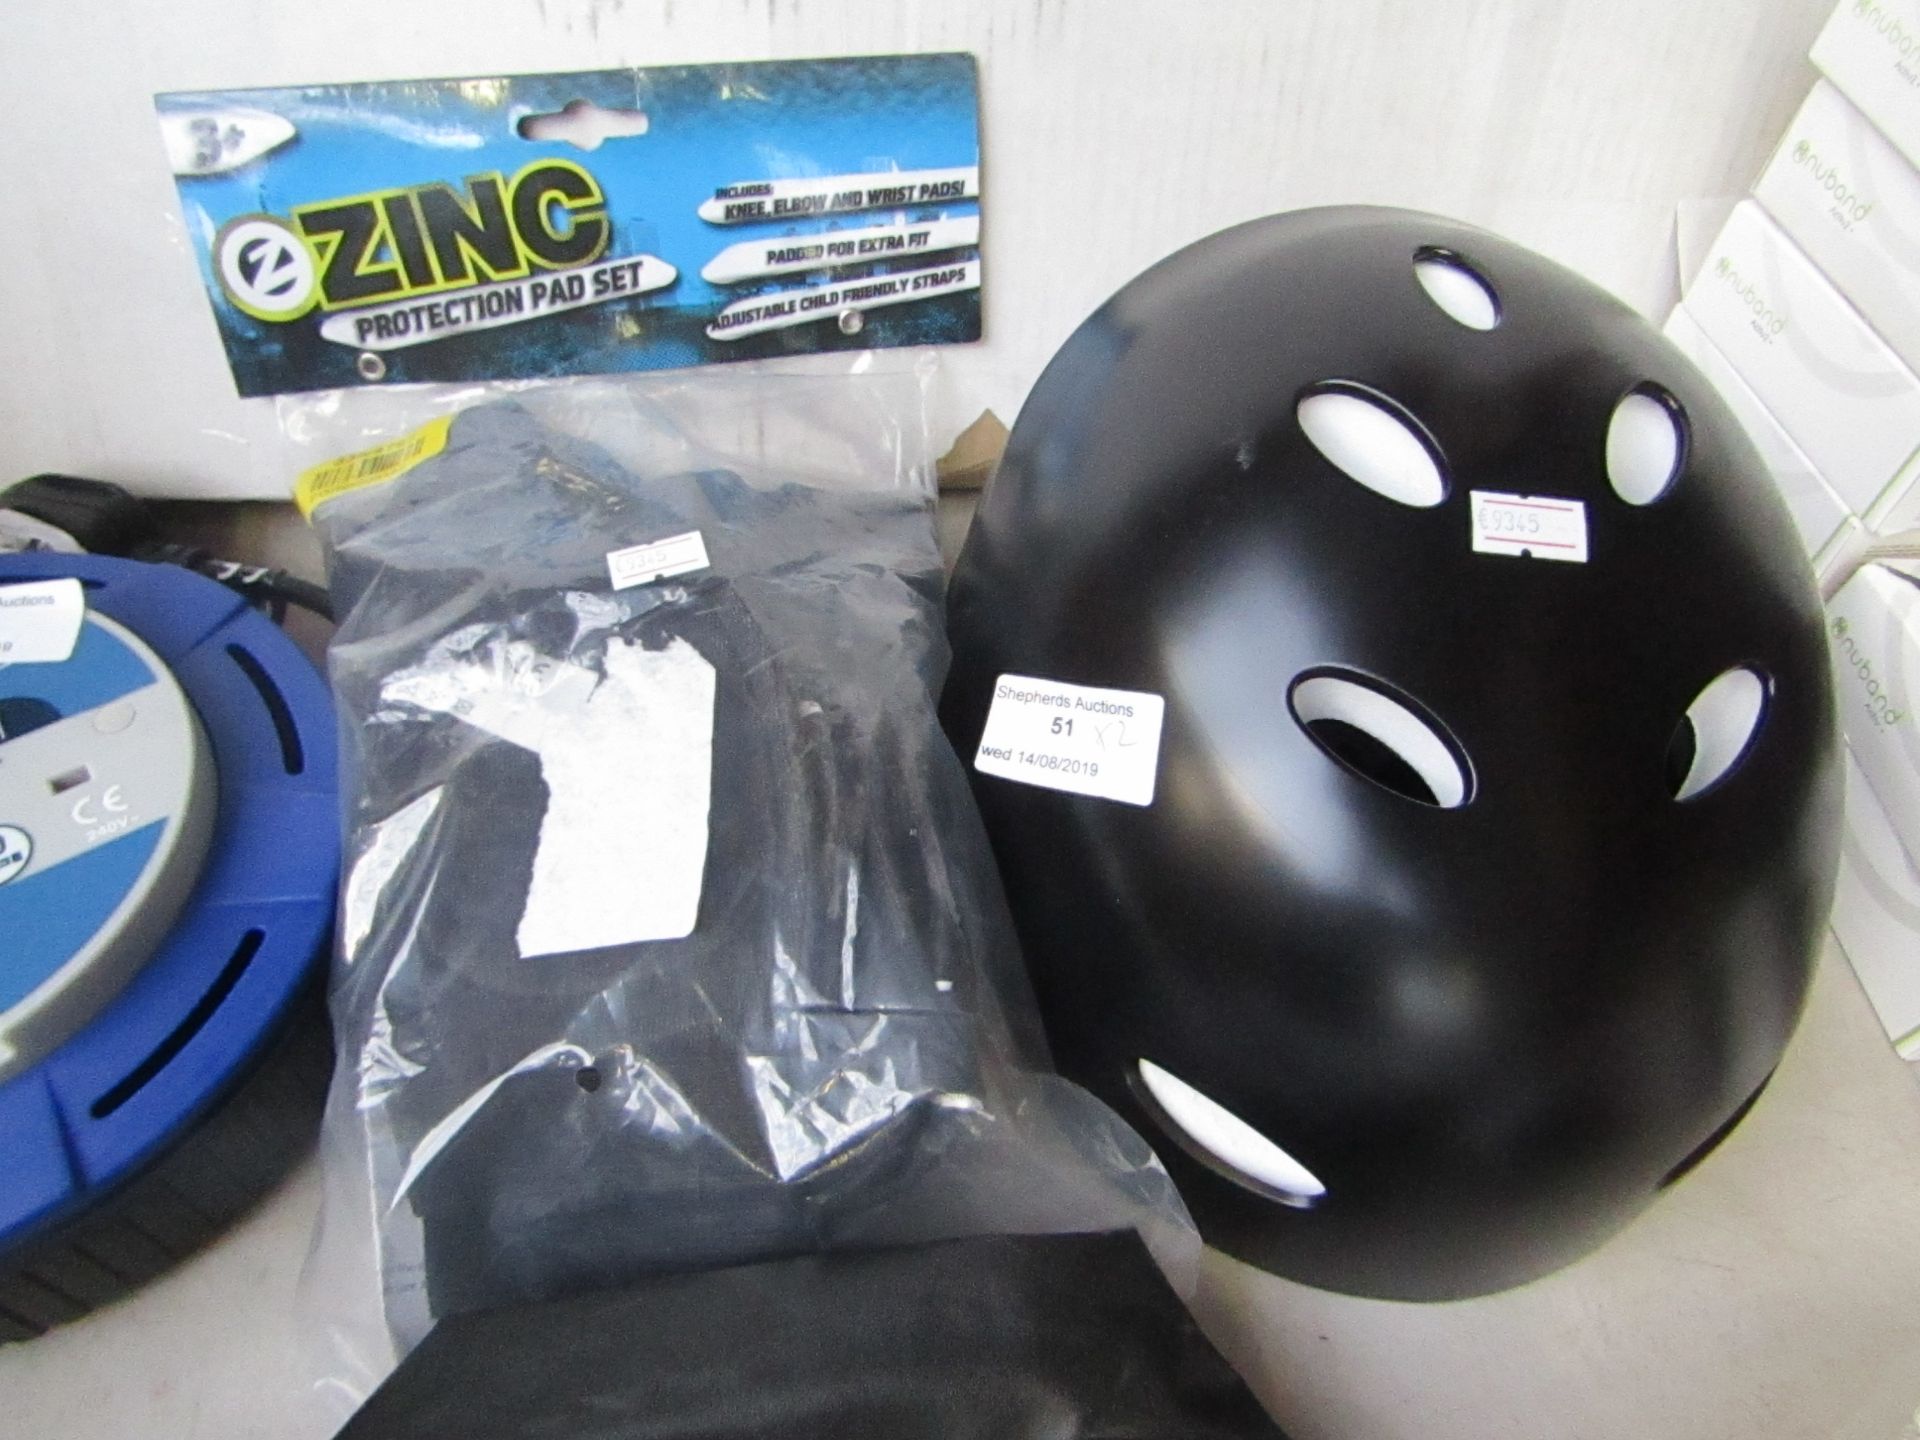 Zinc protection pad set with a cycle helmet, one is packaged.